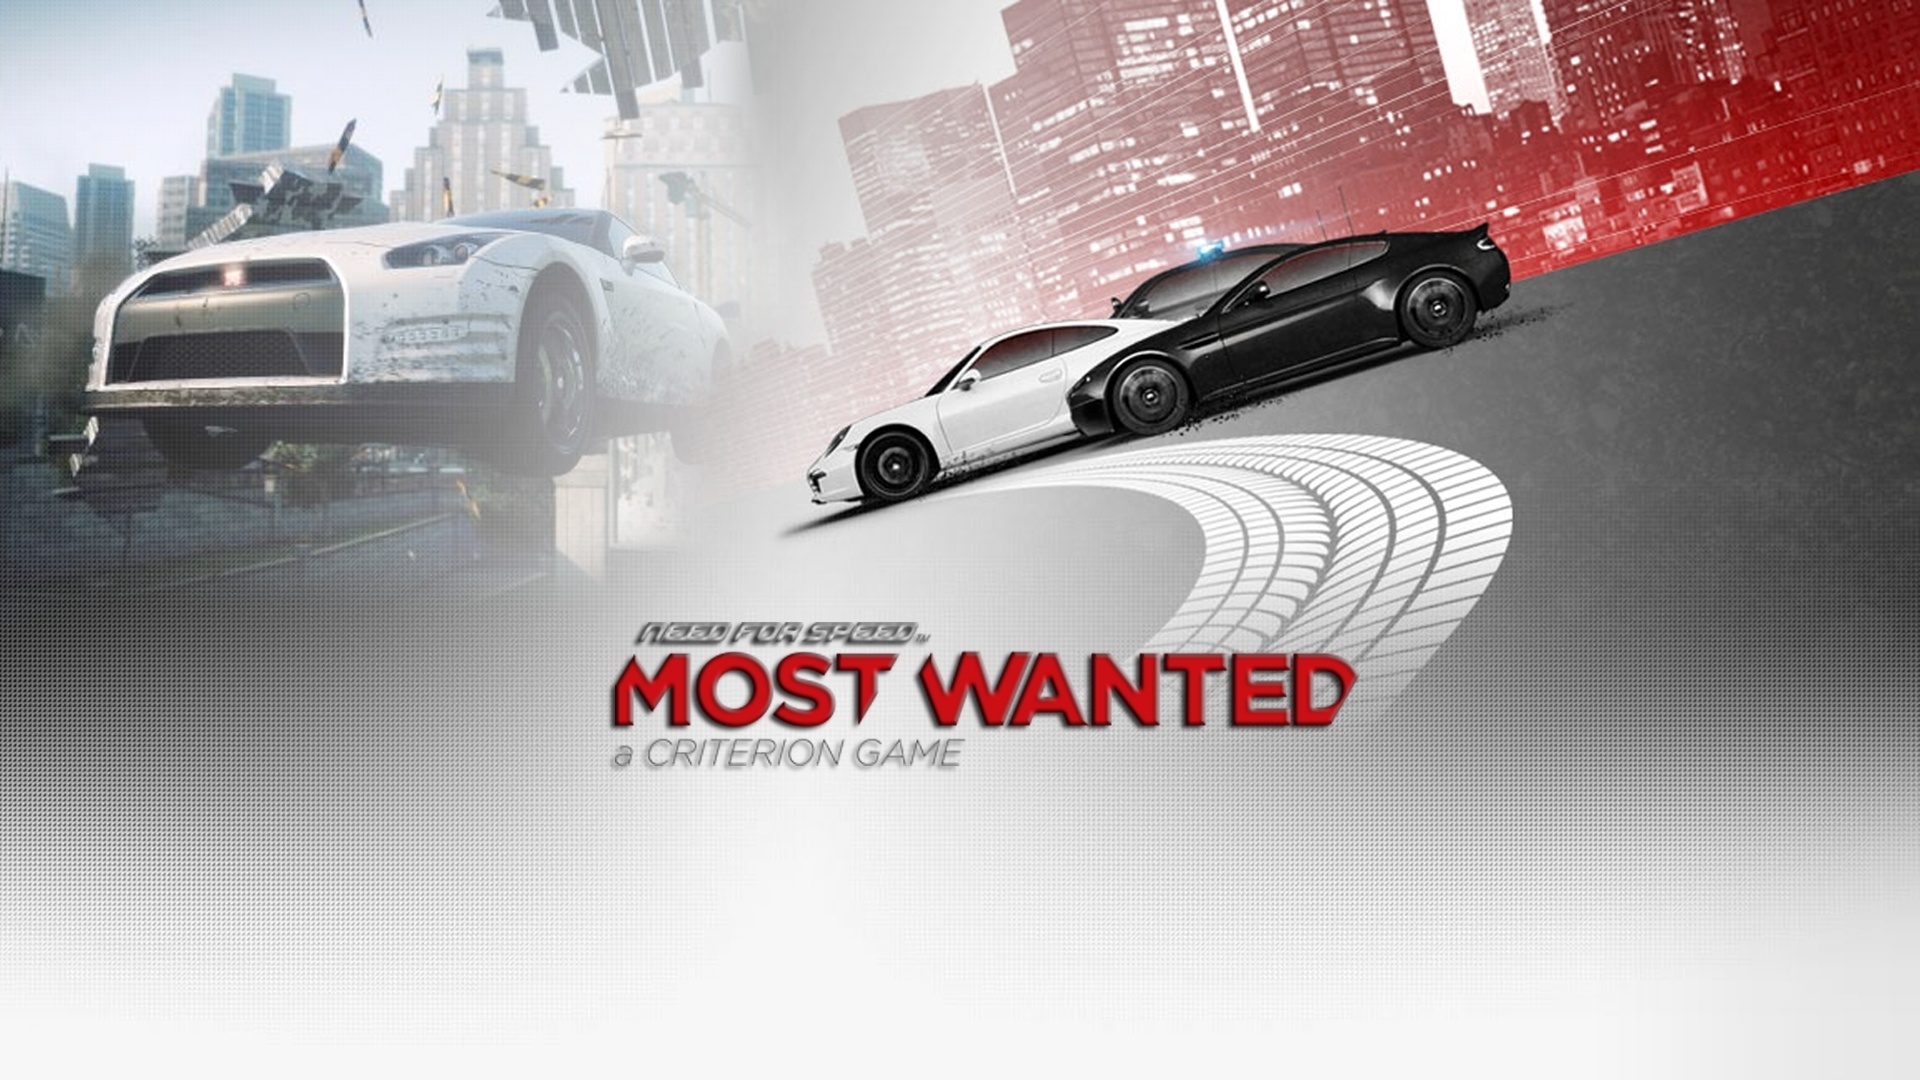 Video Game Need For Speed Most Wanted 1920x1080